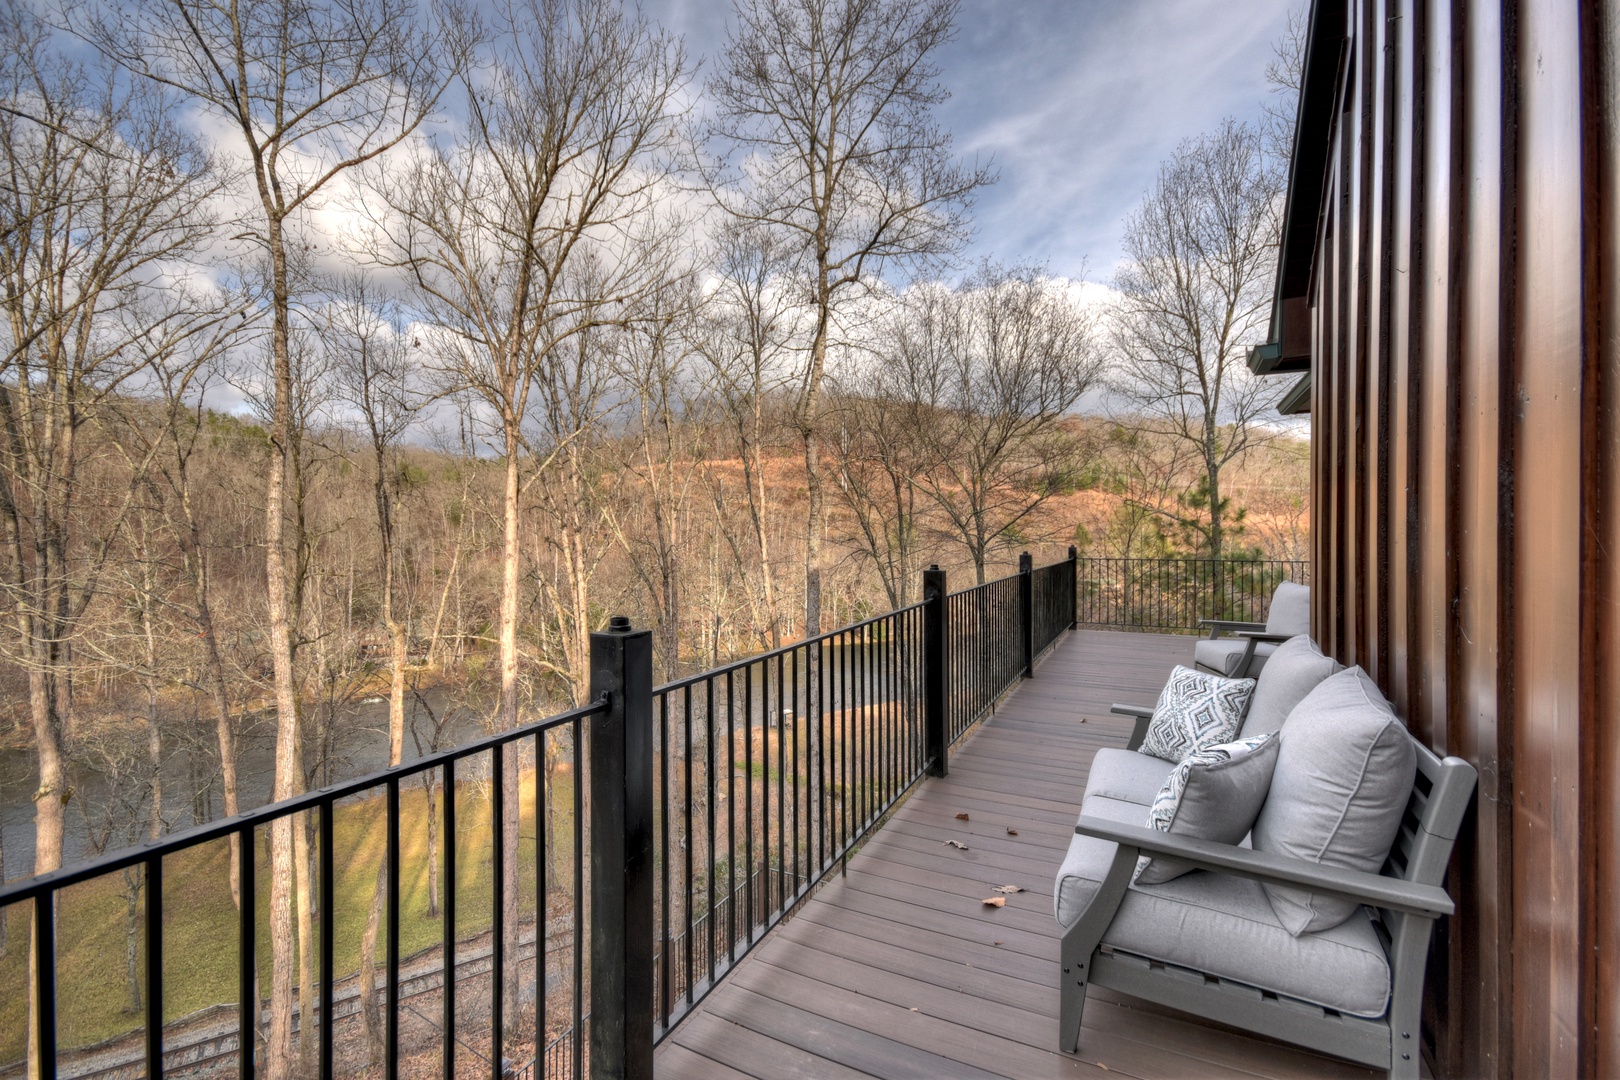 River Lodge- Upper deck area with outdoor seating overlooking the river